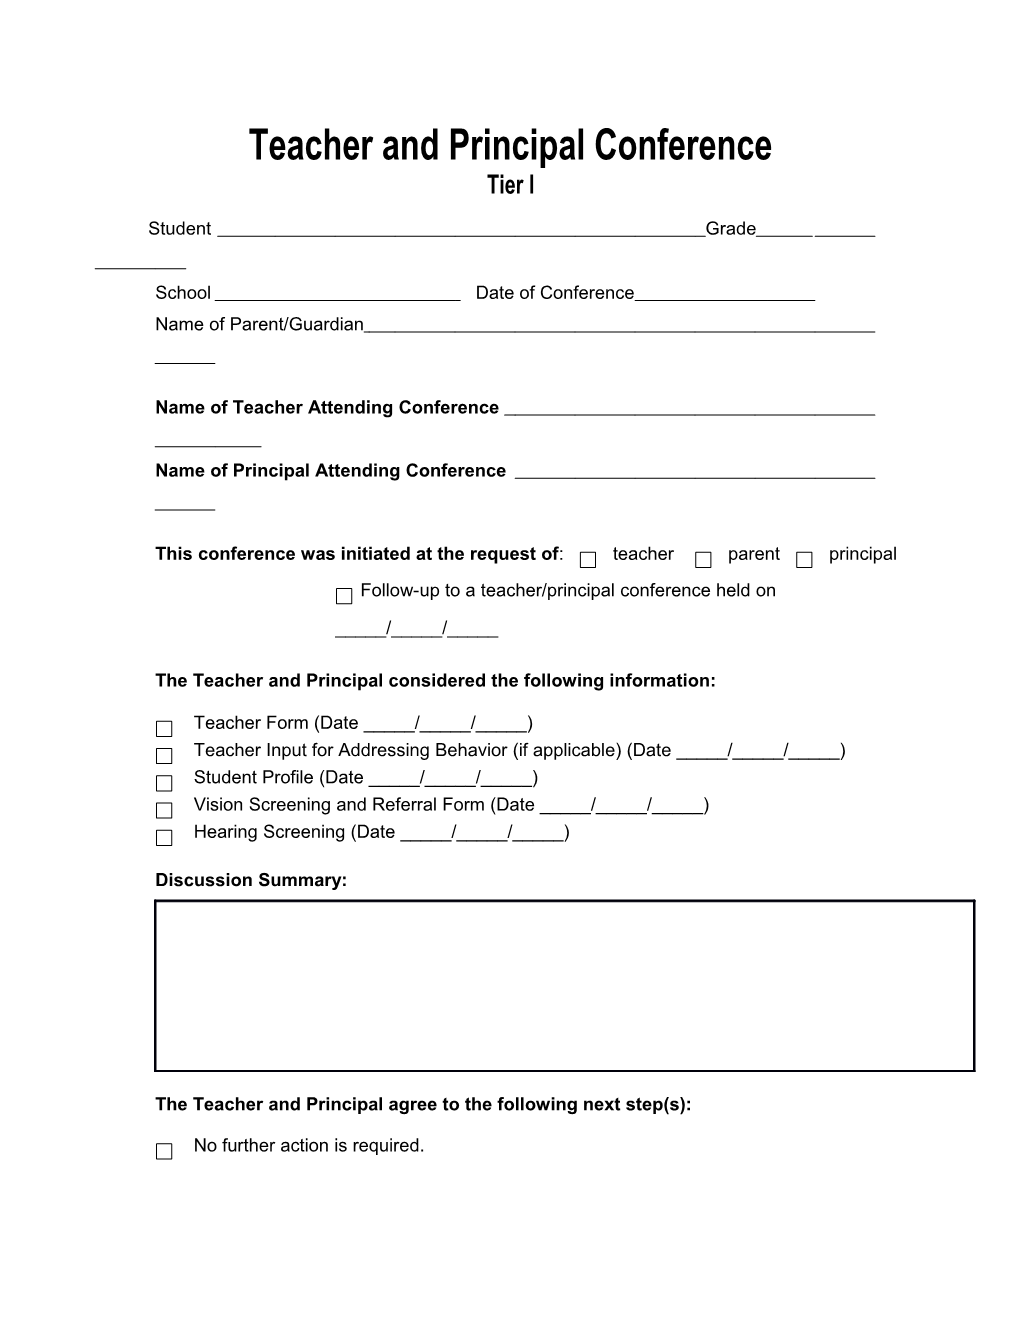 Teacher and Principal Conference